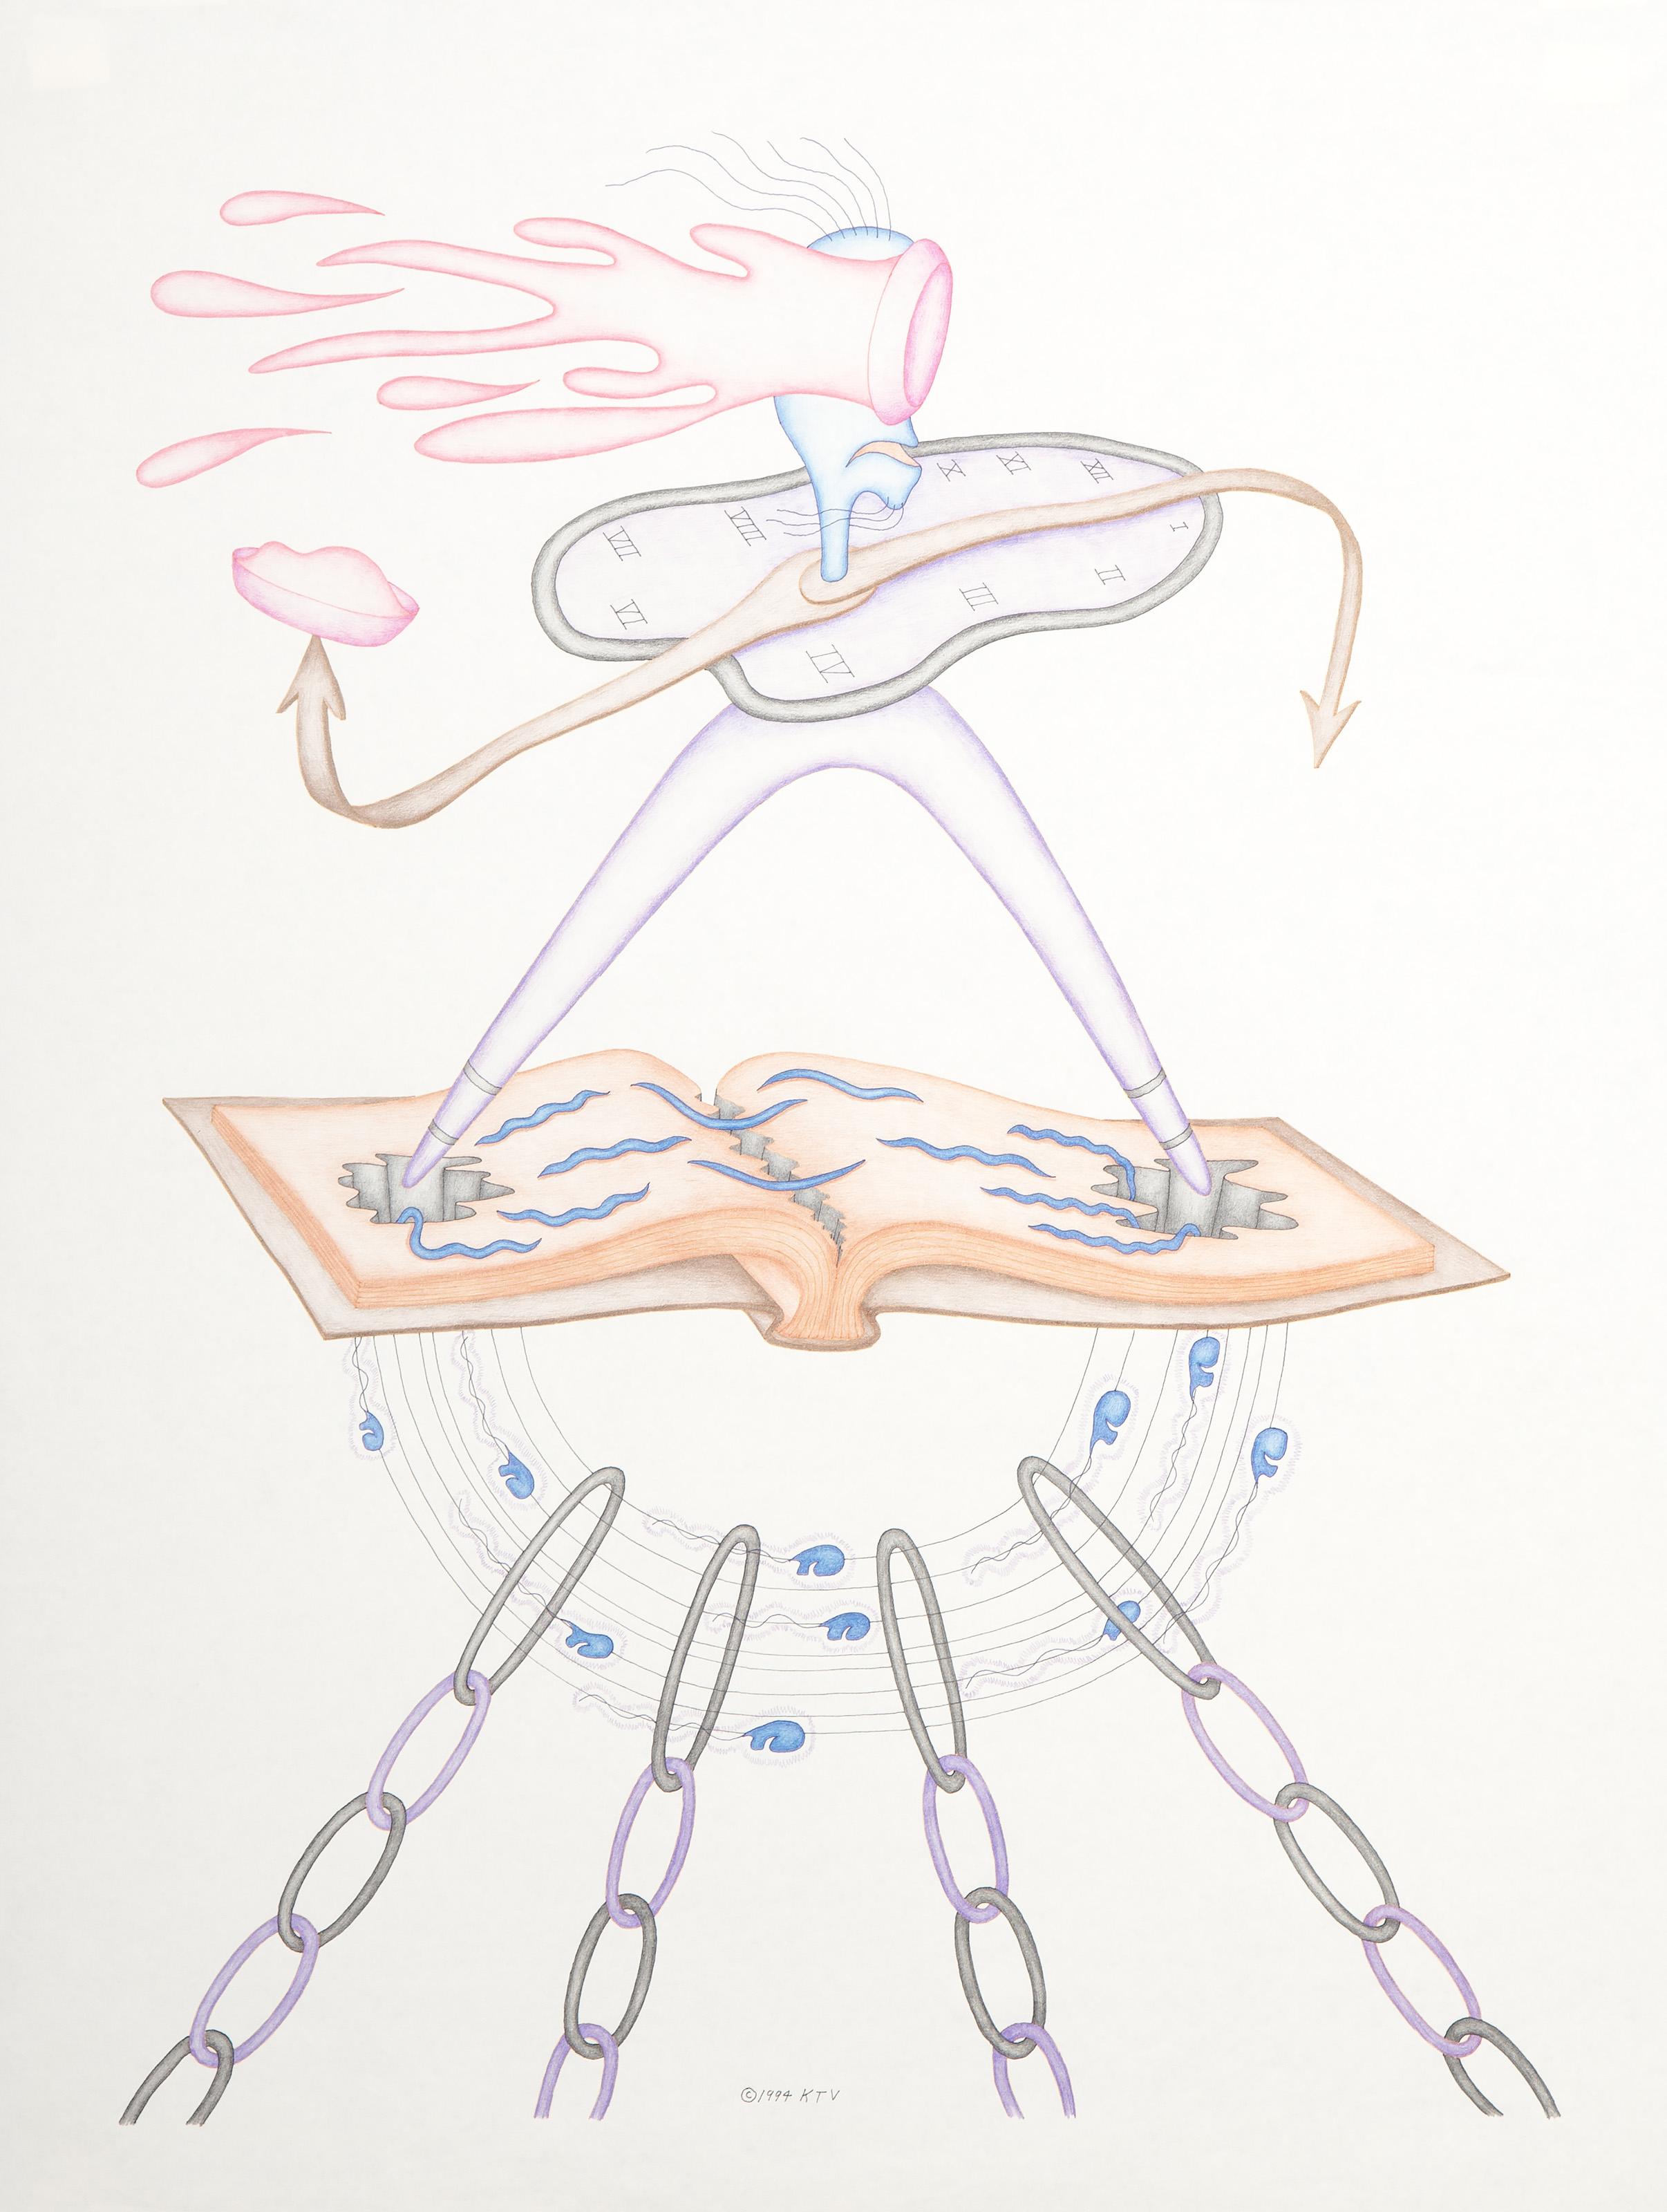 Kevin Varner, American (1954 - 2019) -  Primordial Pie. Year: 1994, Medium: Color Pencil and Ink on Paper, signed and dated lower left, Size: 27 x 21 in. (68.58 x 53.34 cm) 